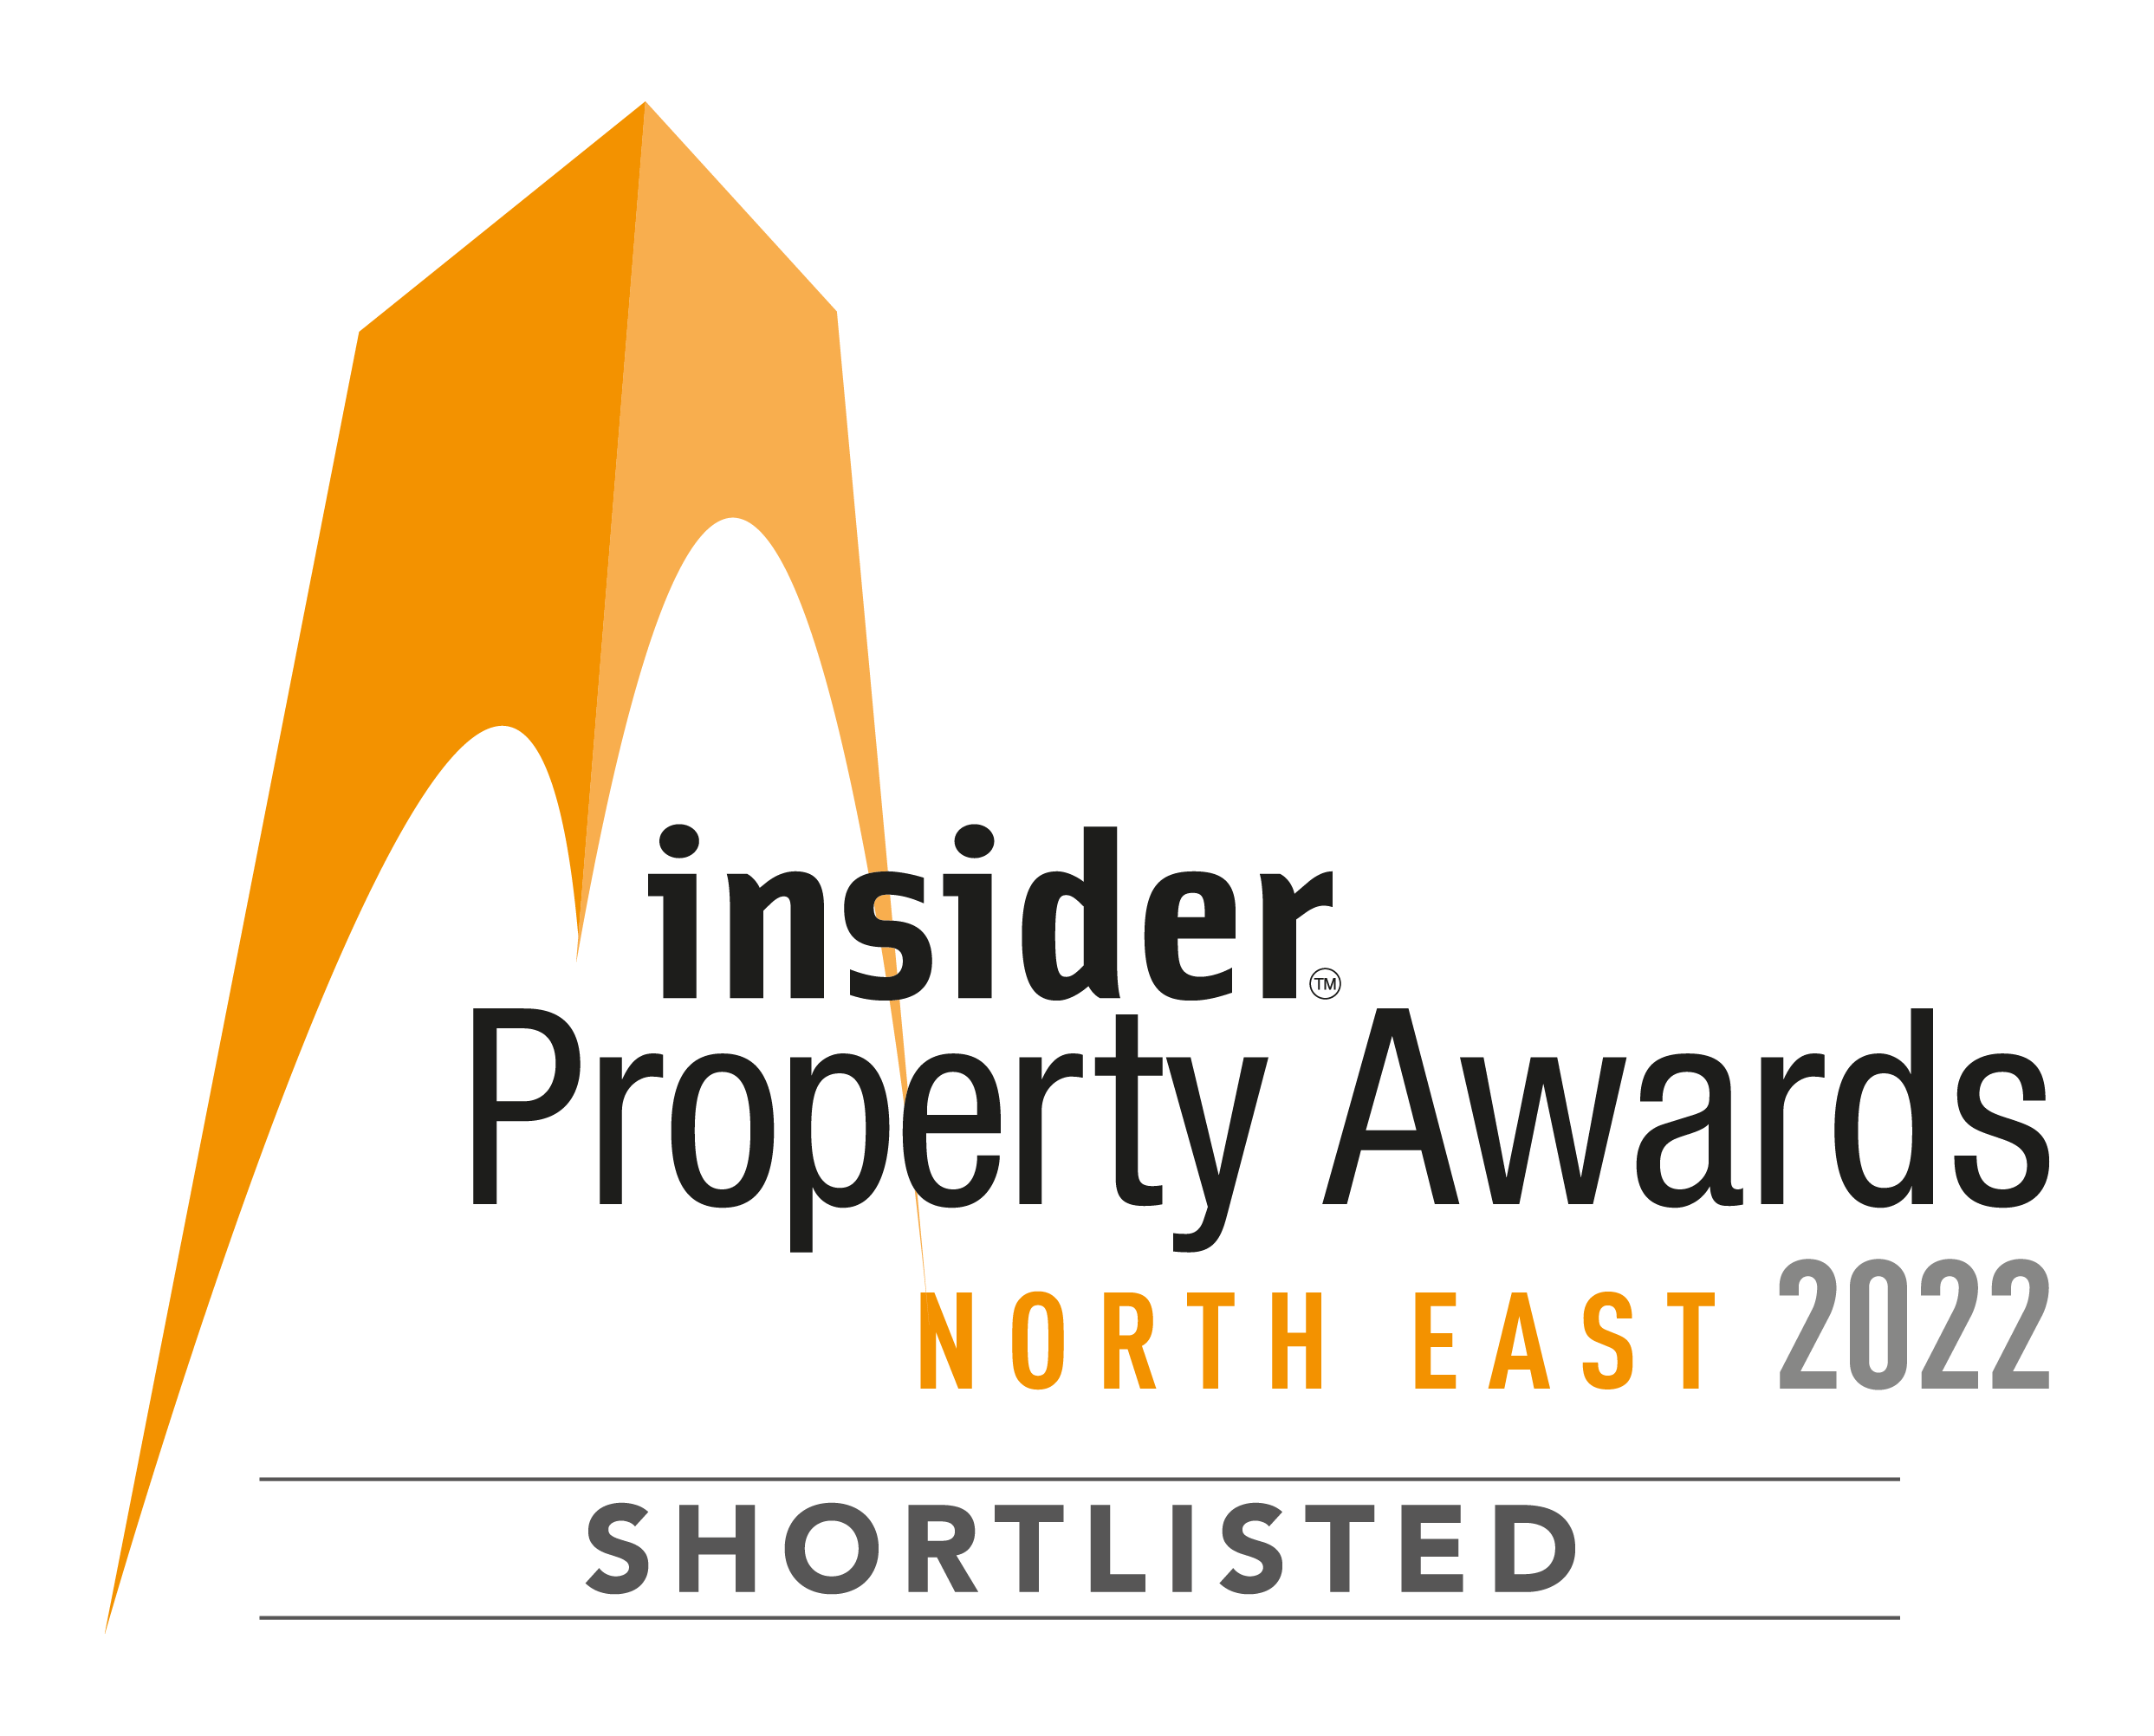 Muckle shortlisted for Property Law Firm of the Year 2022